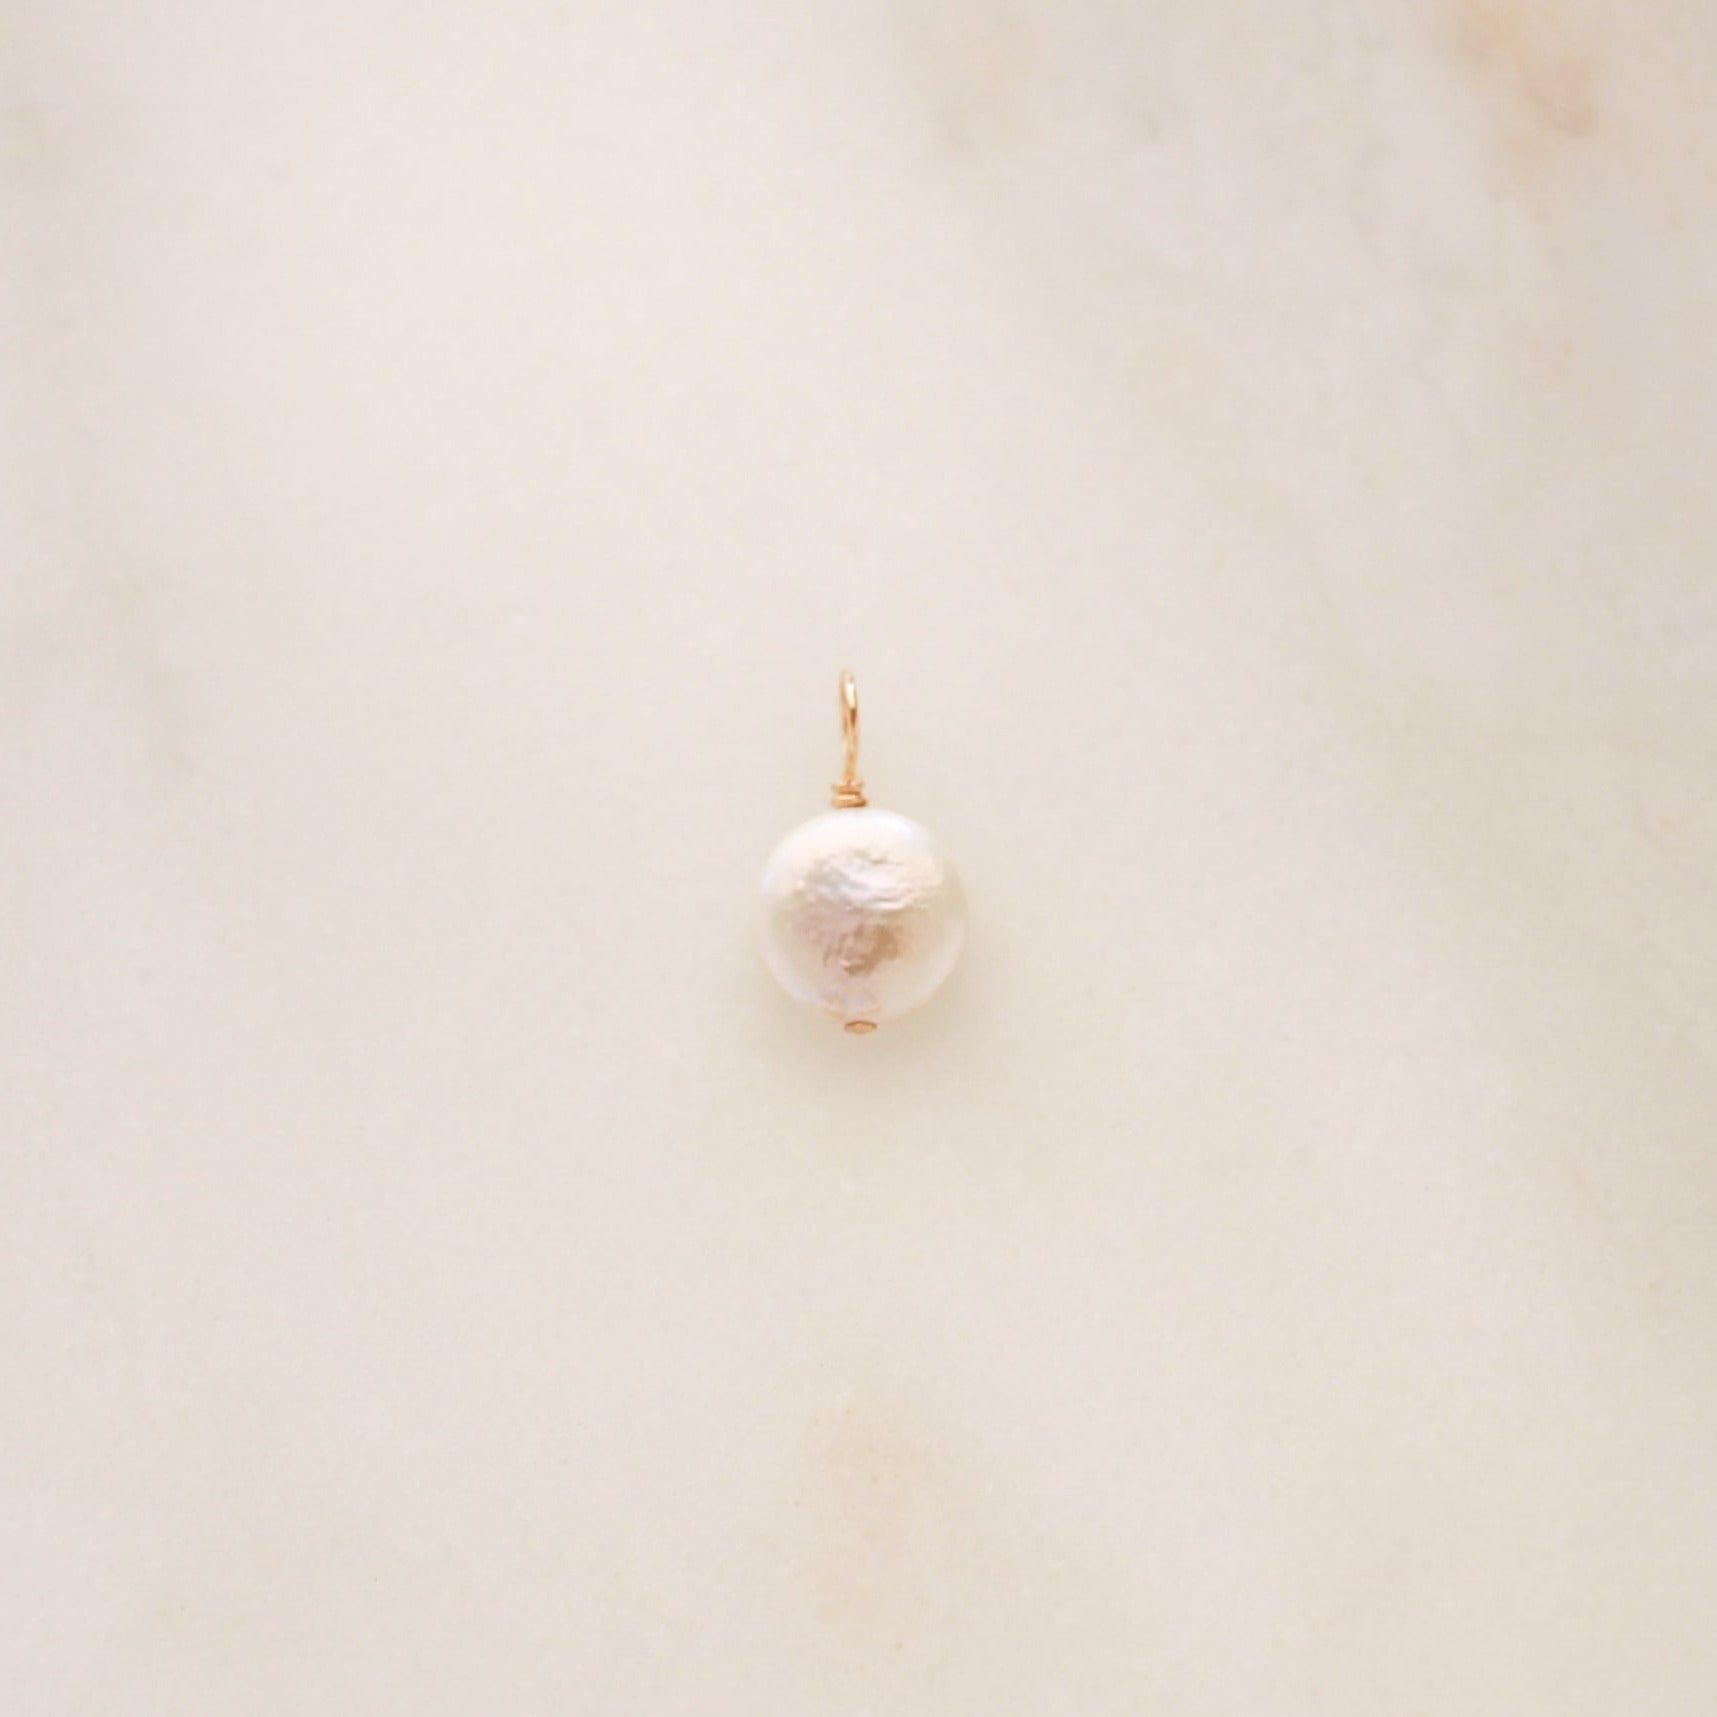 Lana Pearl Charm • Add On - Nolia Jewelry - Meaningful + Sustainably Handcrafted Jewelry